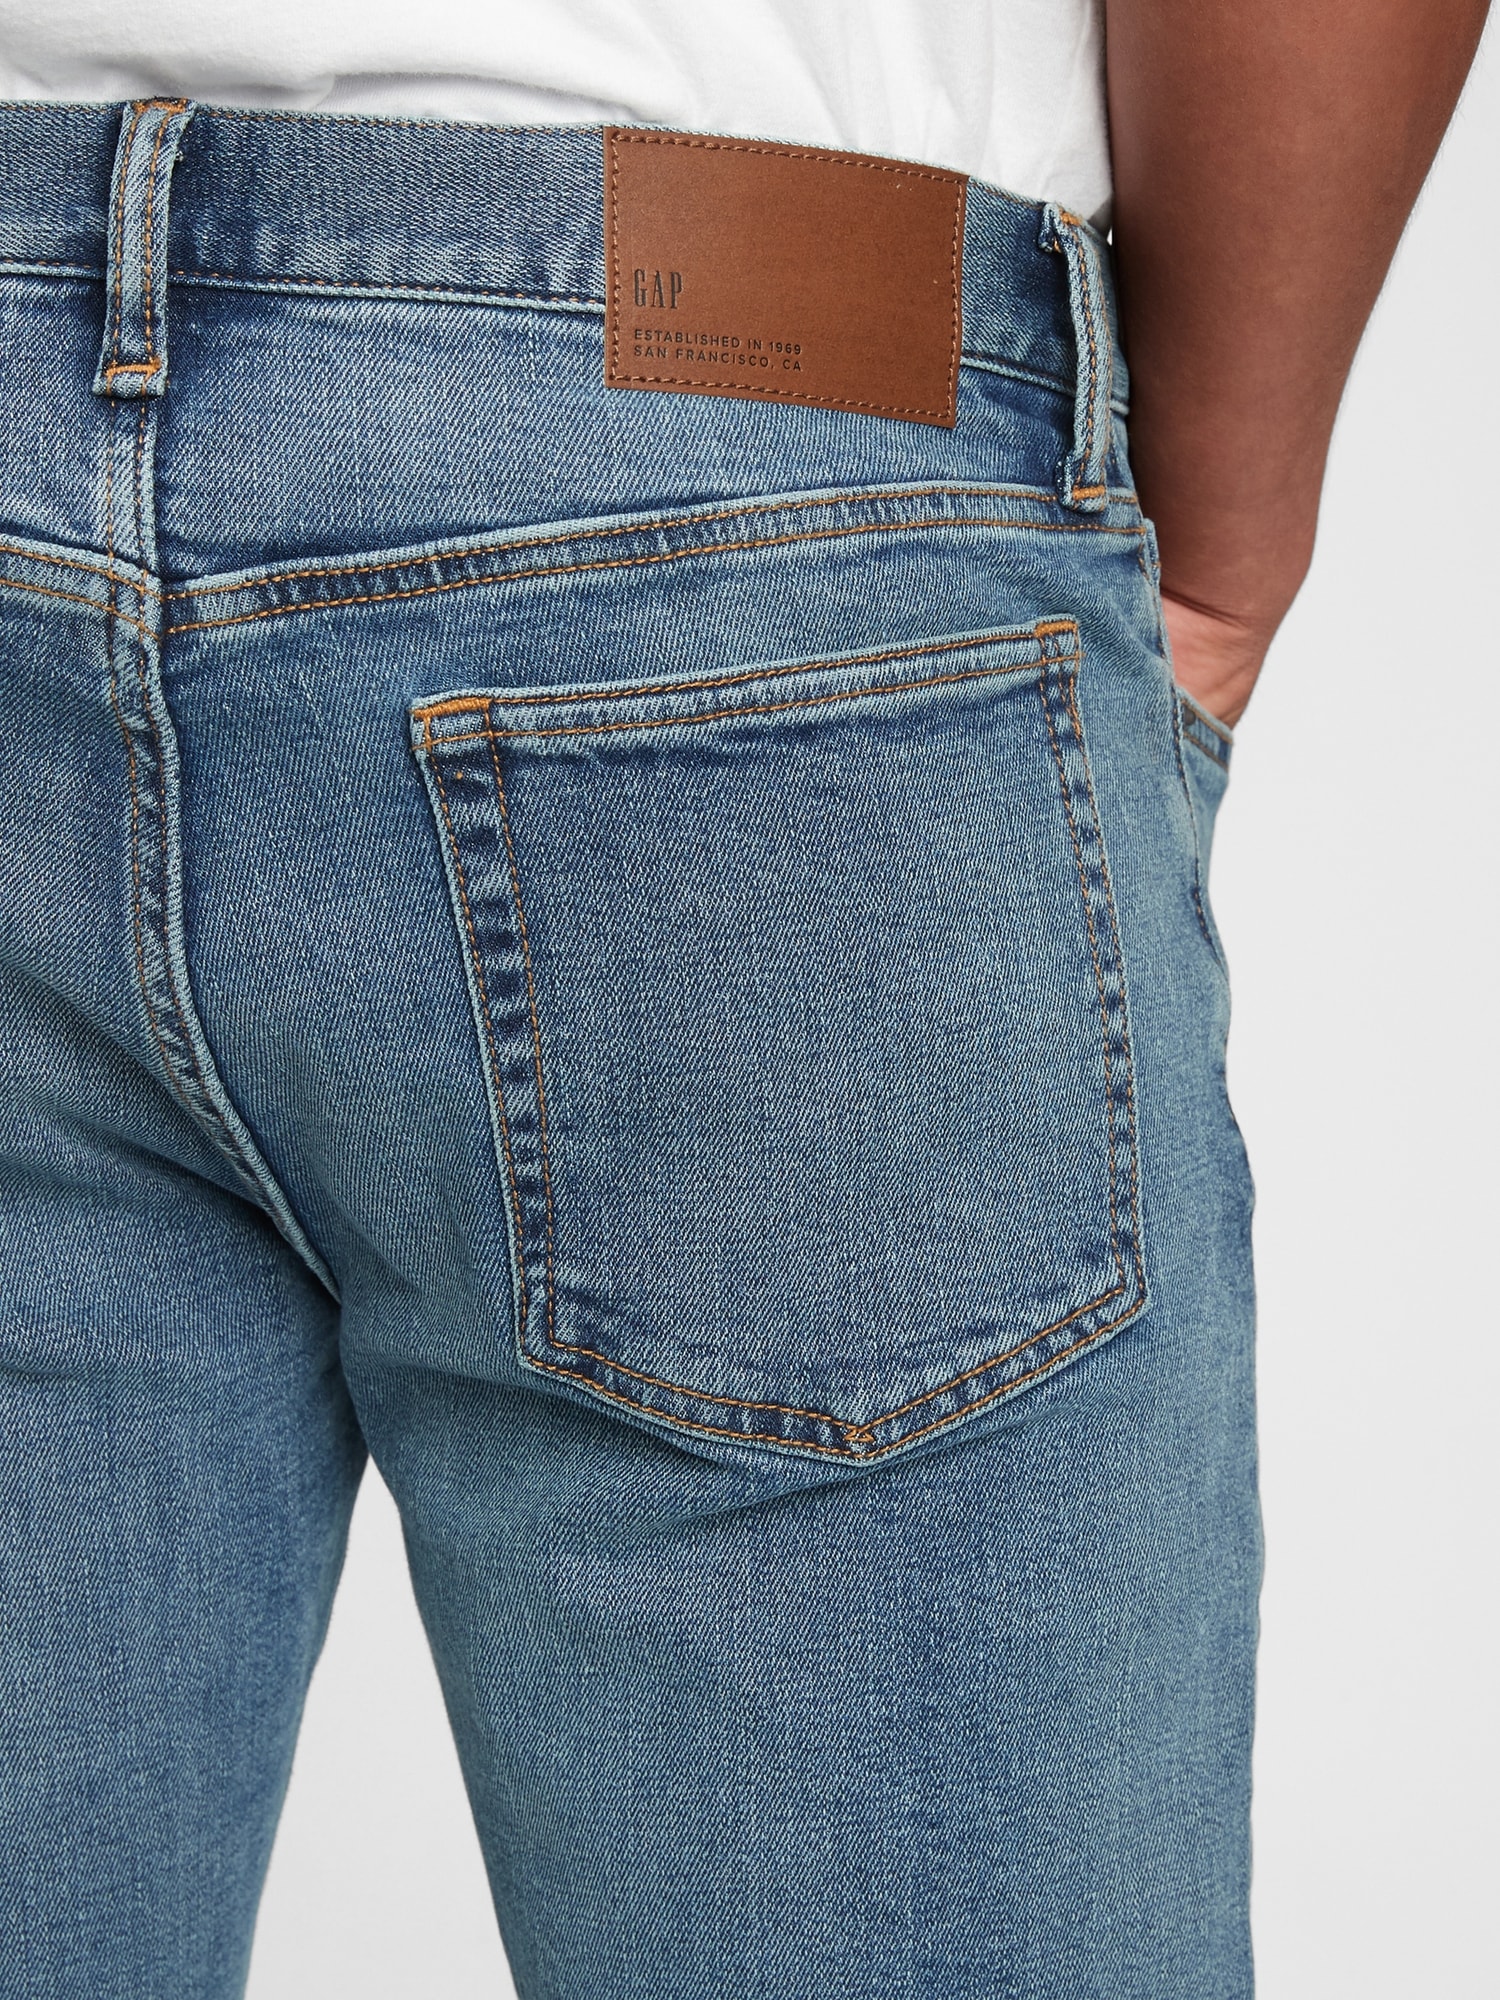 Slim Jeans in GapFlex with Washwell |